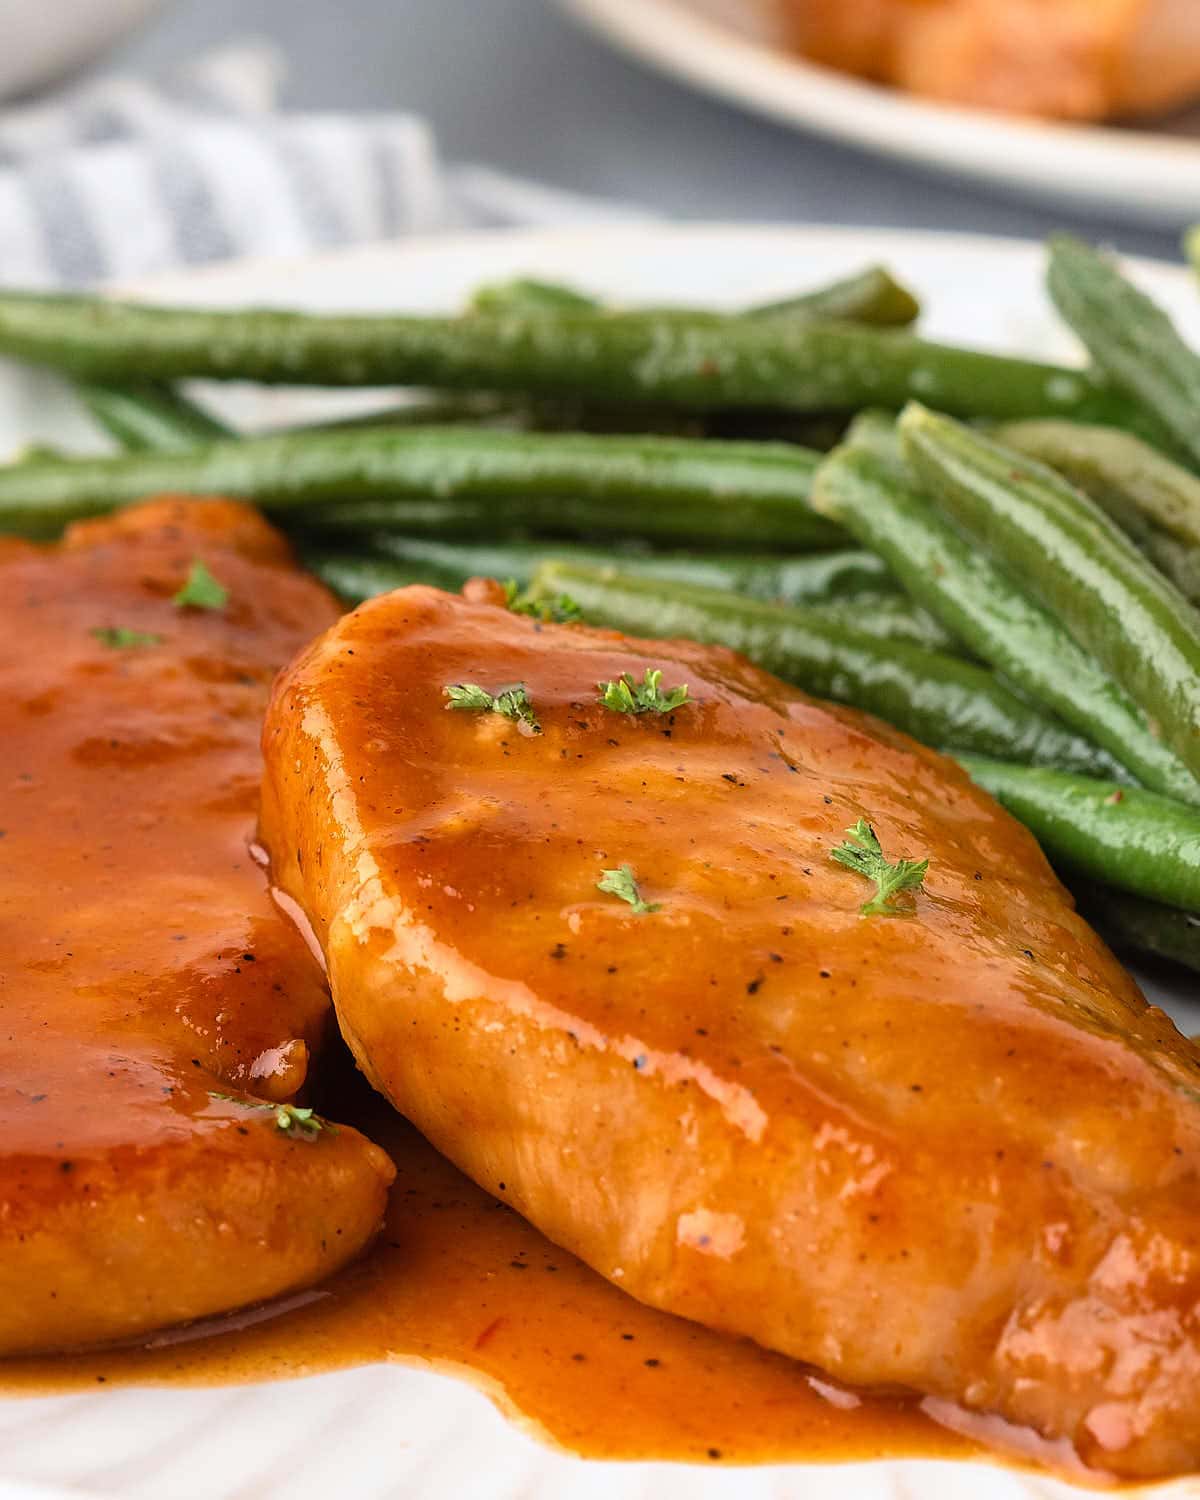 A plate with pork chops and green beans.